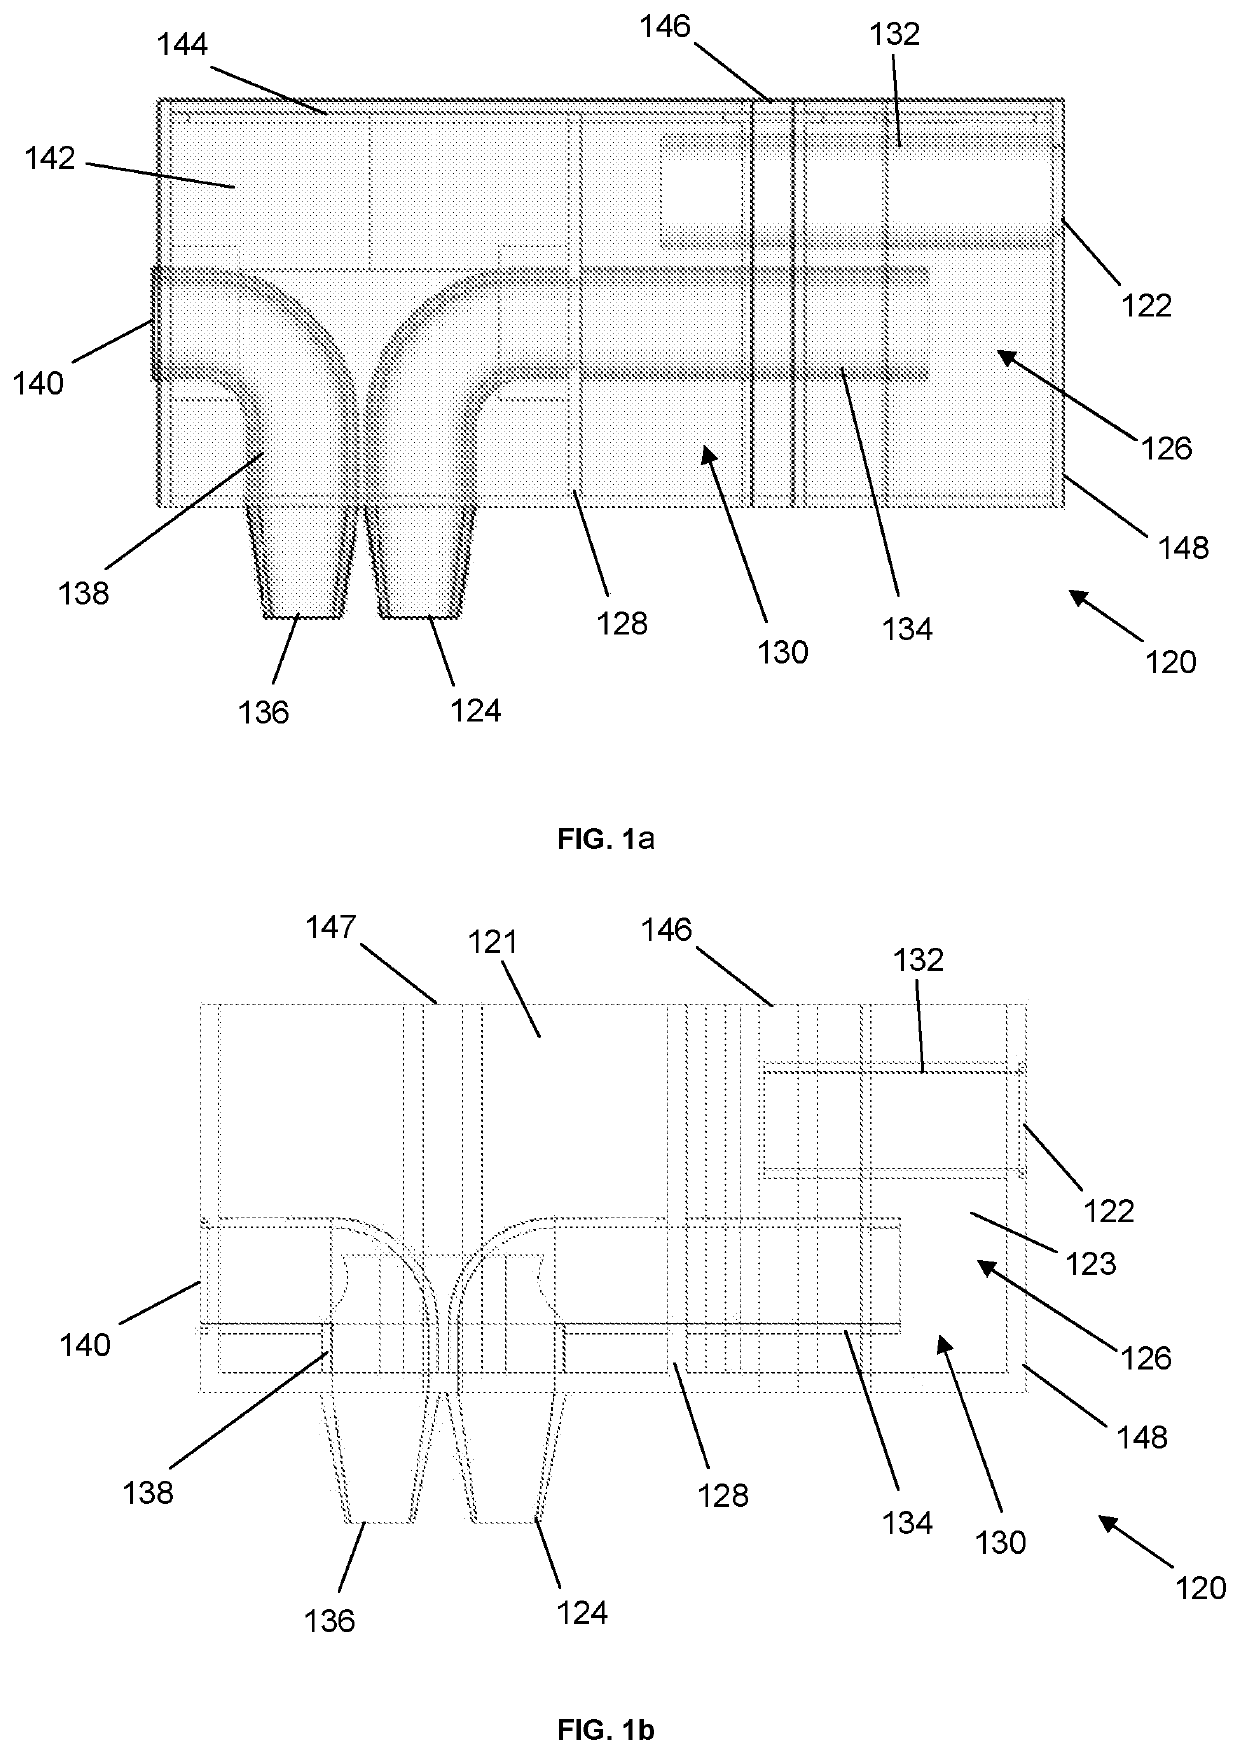 Exhaled breath condensate collection device and a kit of parts therefor